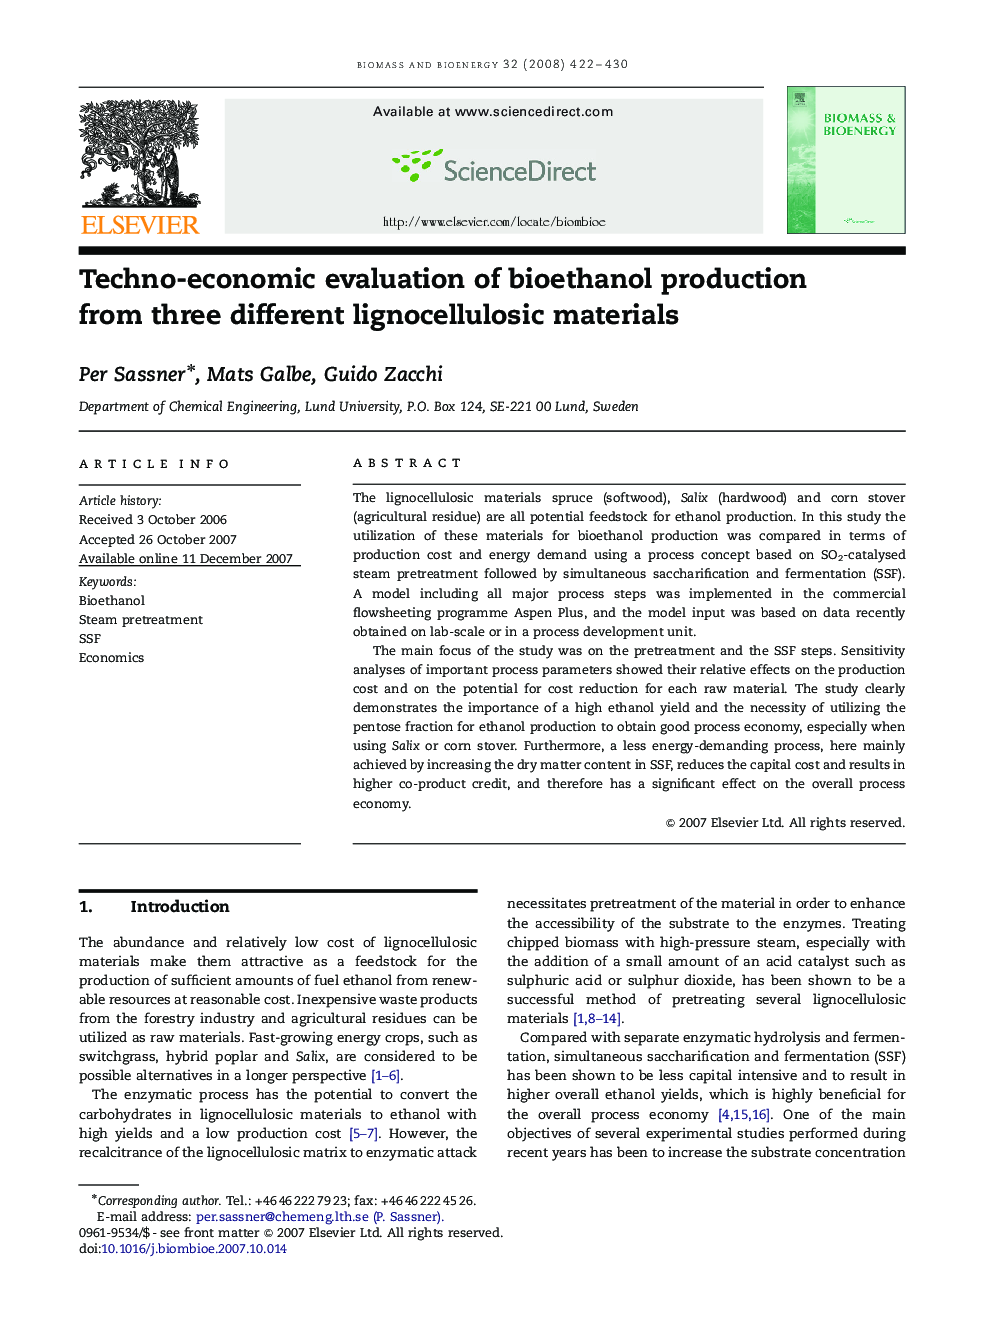 Techno-economic evaluation of bioethanol production from three different lignocellulosic materials